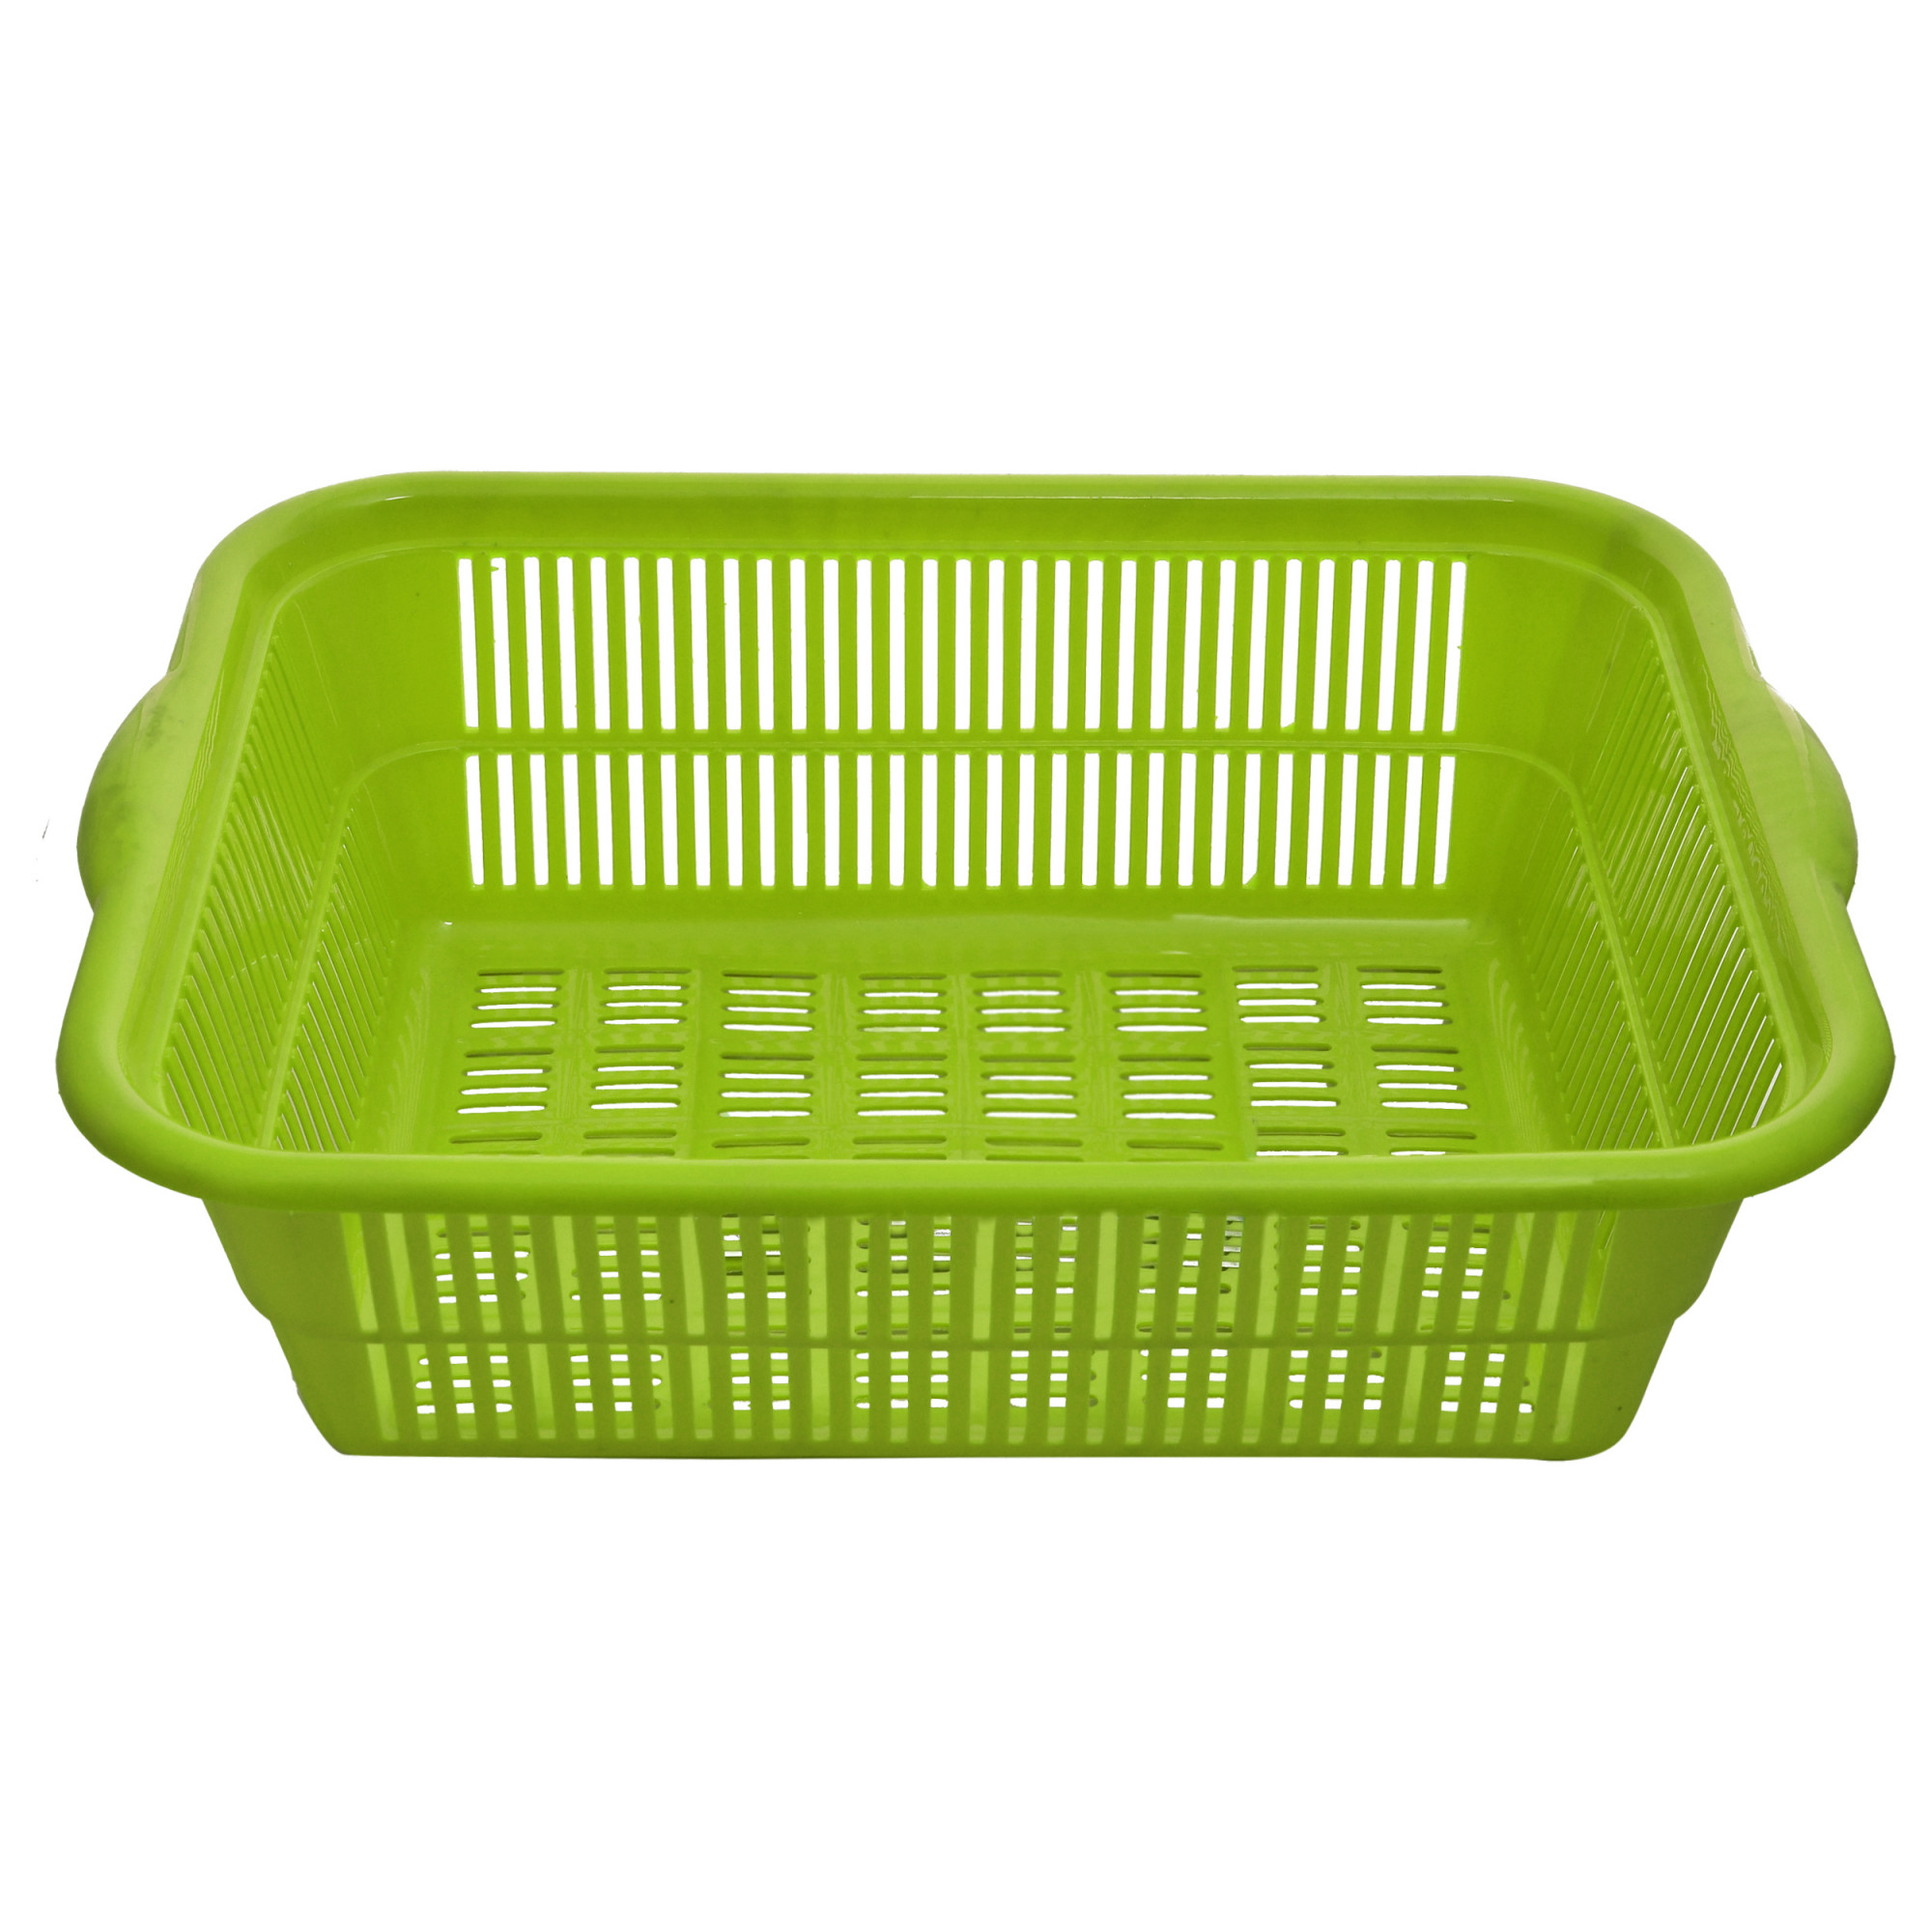 Kuber Industries 2 Pieces Plastic Kitchen Dish Rack Drainer Vegetables And Fruits Basket Dish Rack Multipurpose Organizers ,Large Size,Green & Blue